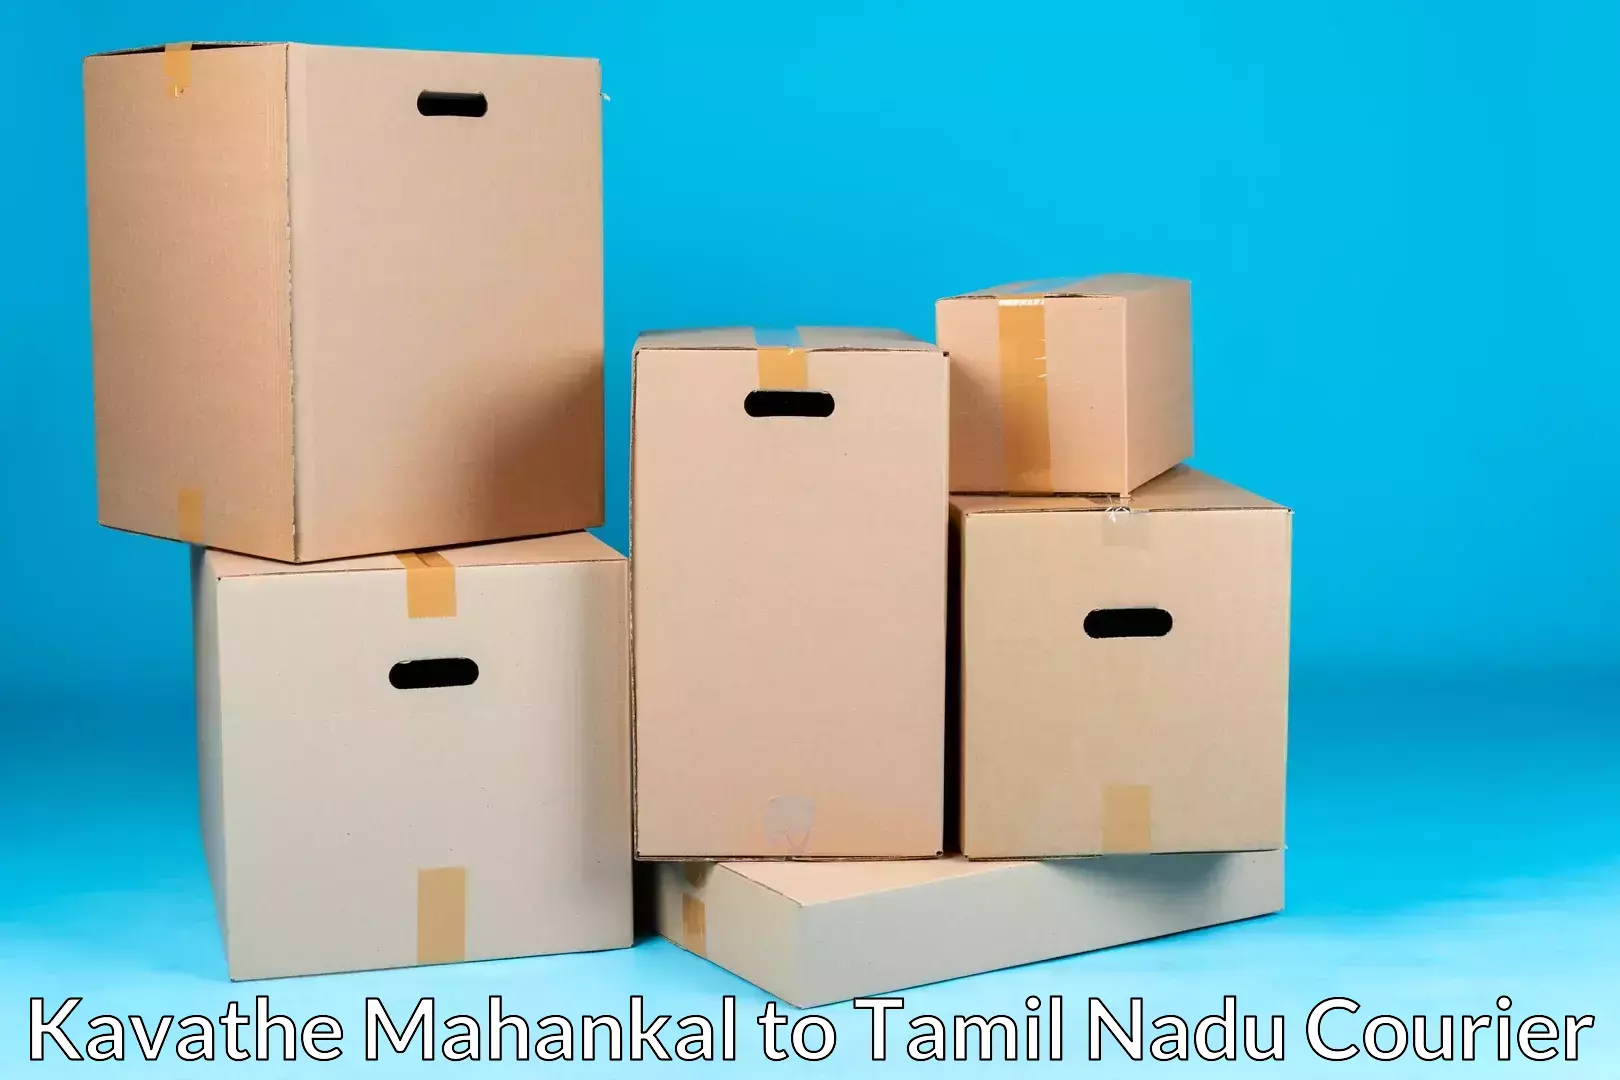 Quality relocation services Kavathe Mahankal to Mylapore